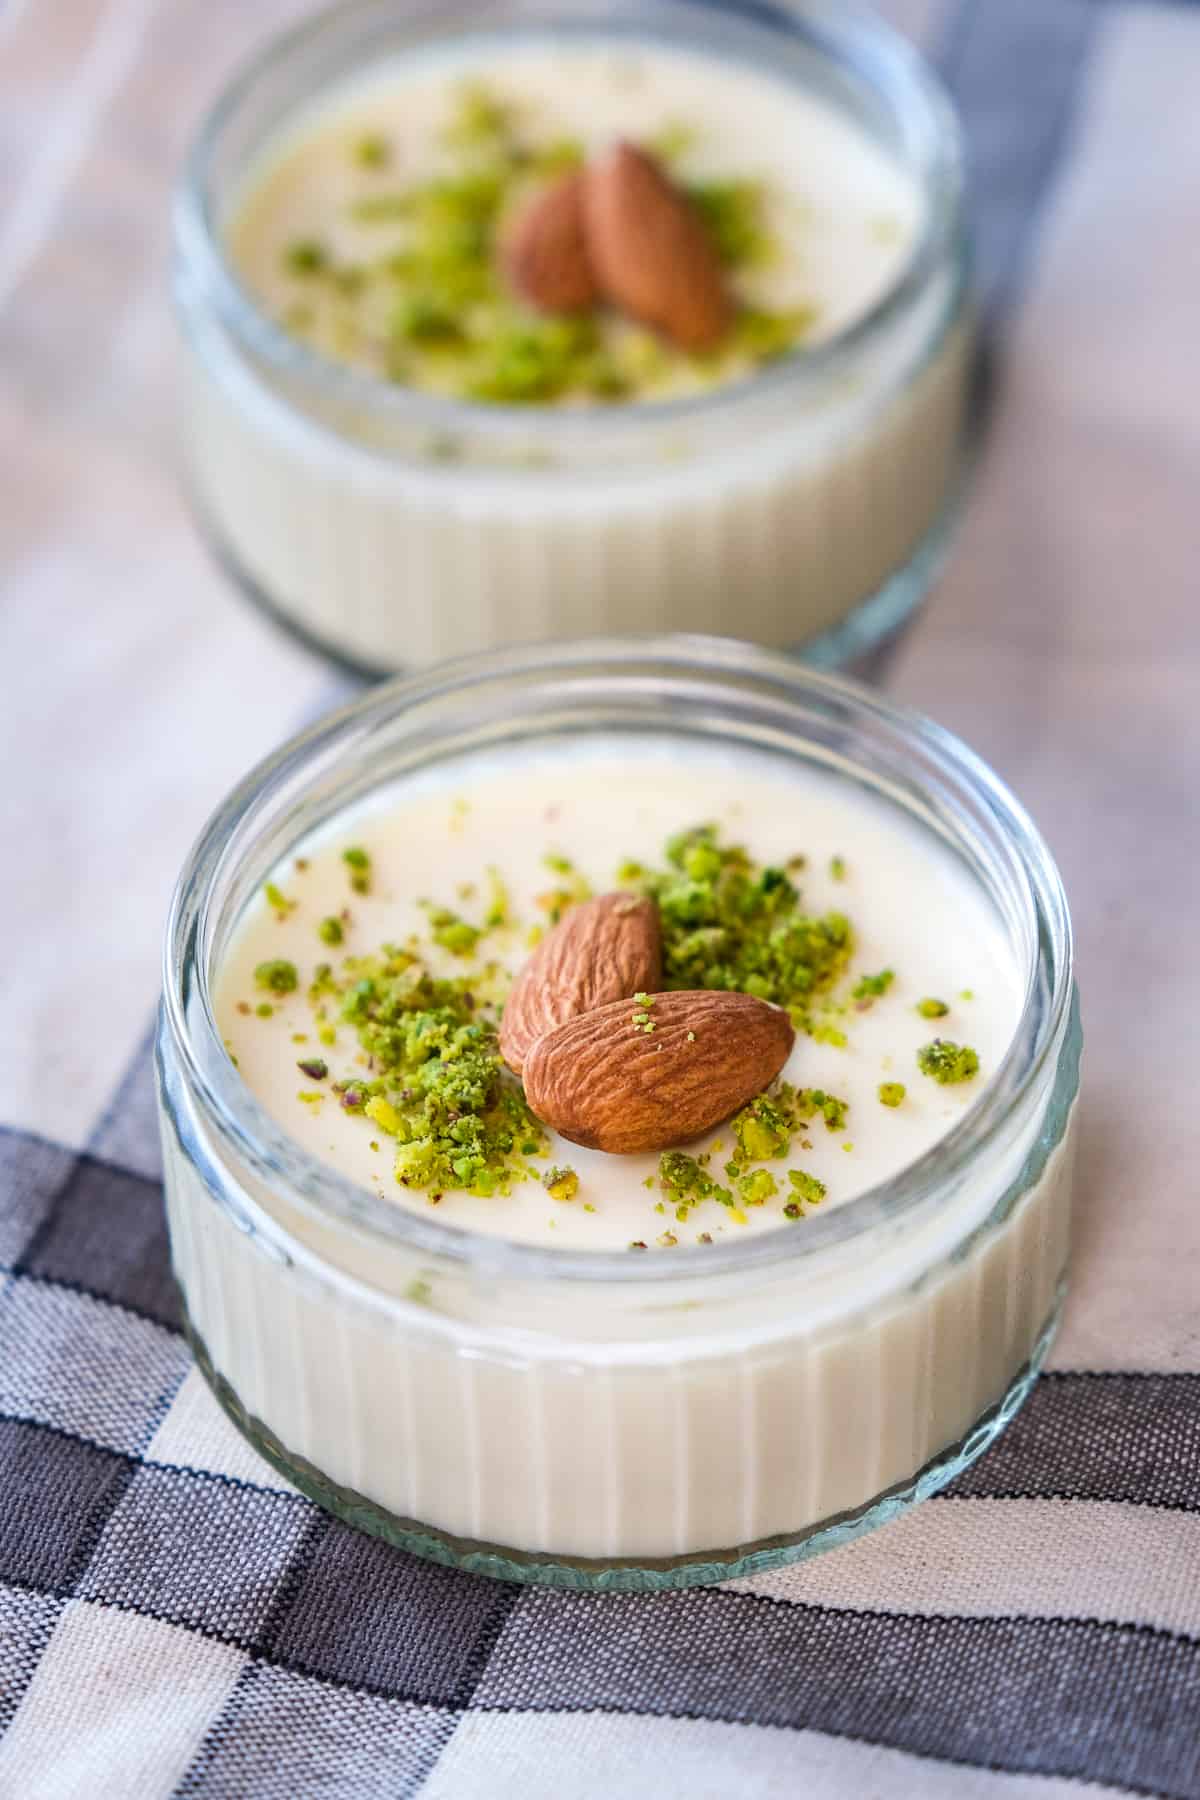 Keskul dessert topped with ground pistachios and whole almonds.